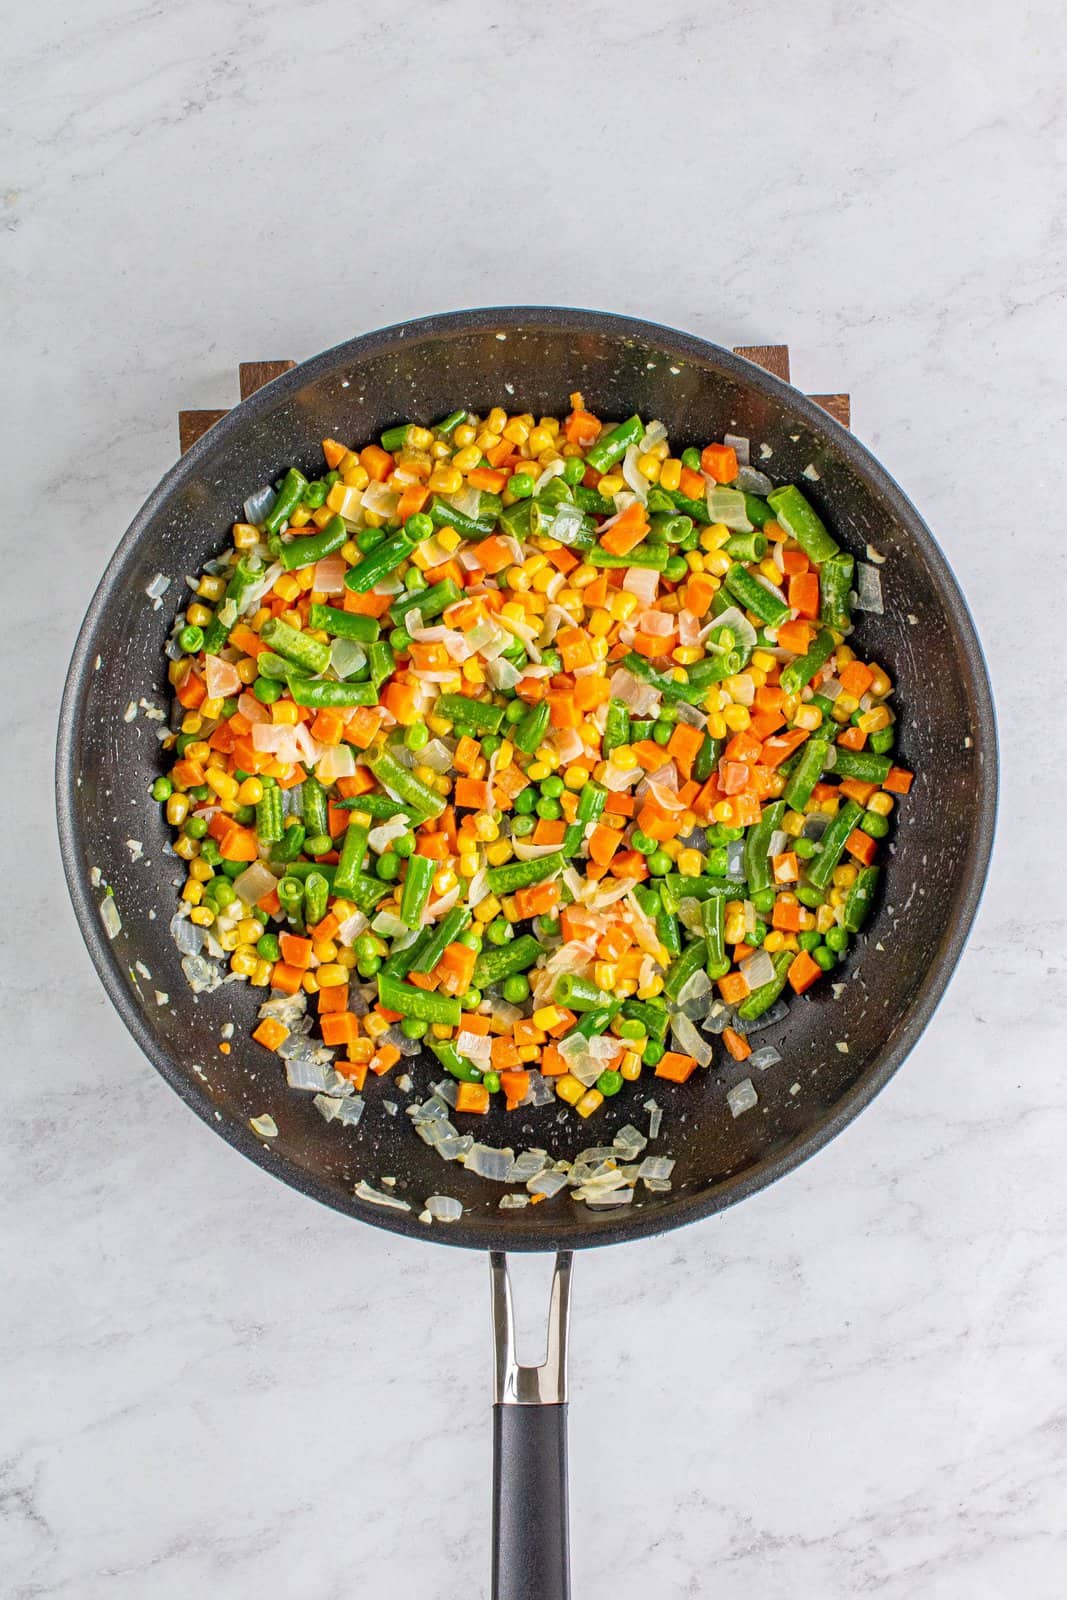 Frozen vegetables added to pan.